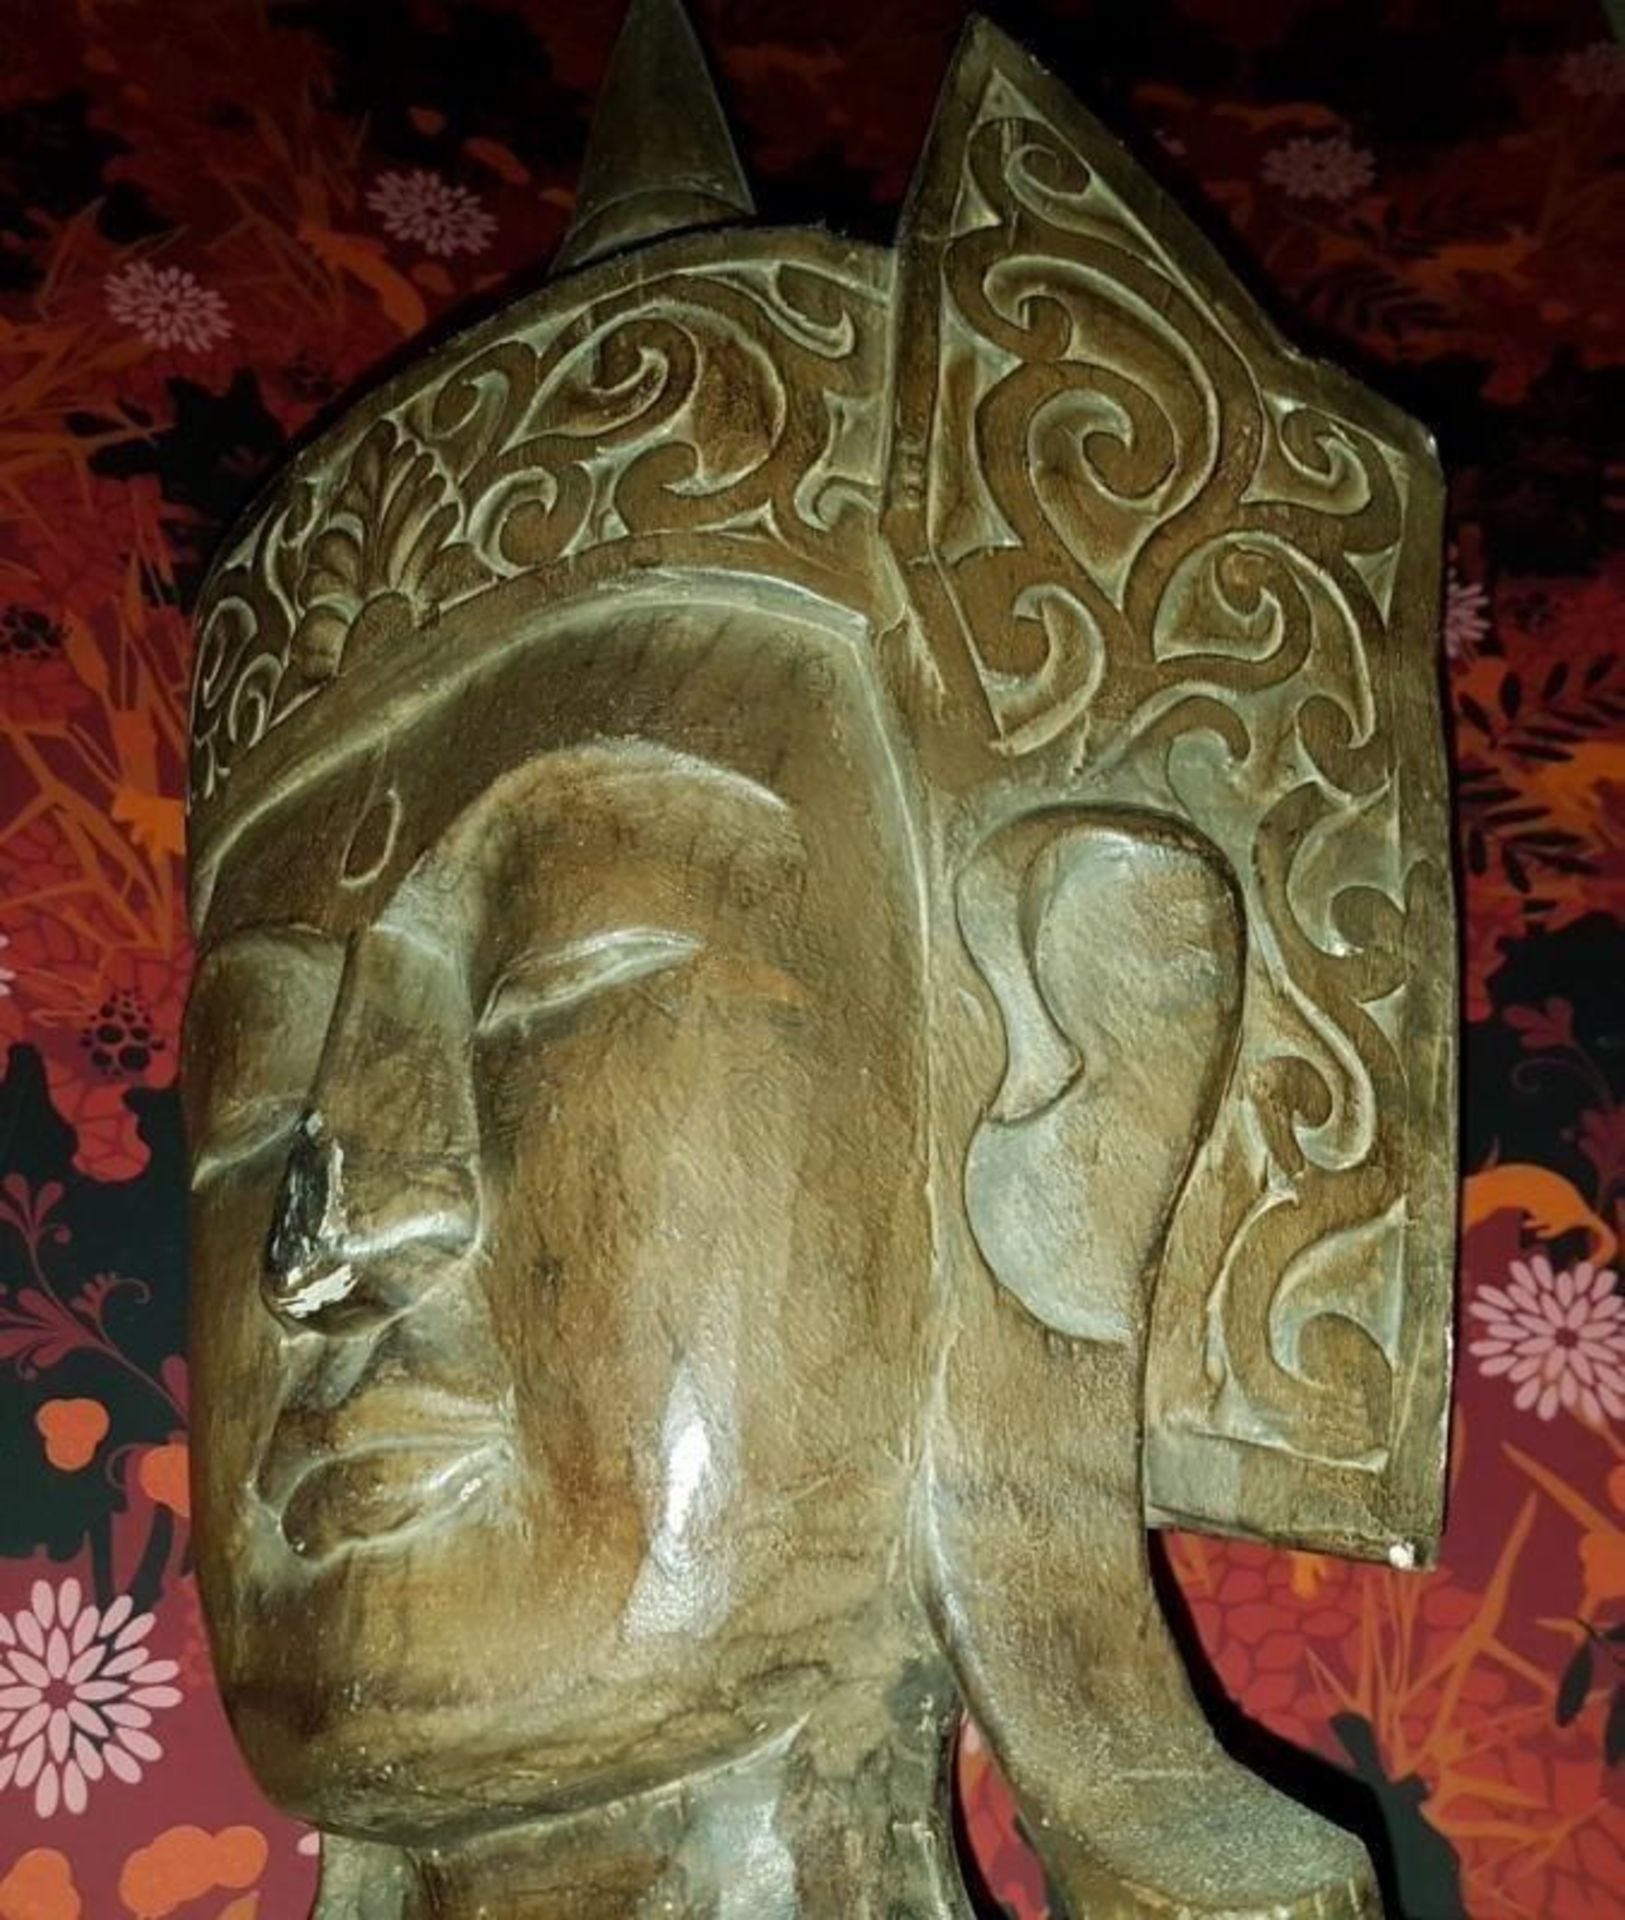 1 x Freestanding Buddha Statue - Over 8ft Tall - Natural Carved Wood Finish - H270 x W95 x D40 cms - - Image 4 of 8